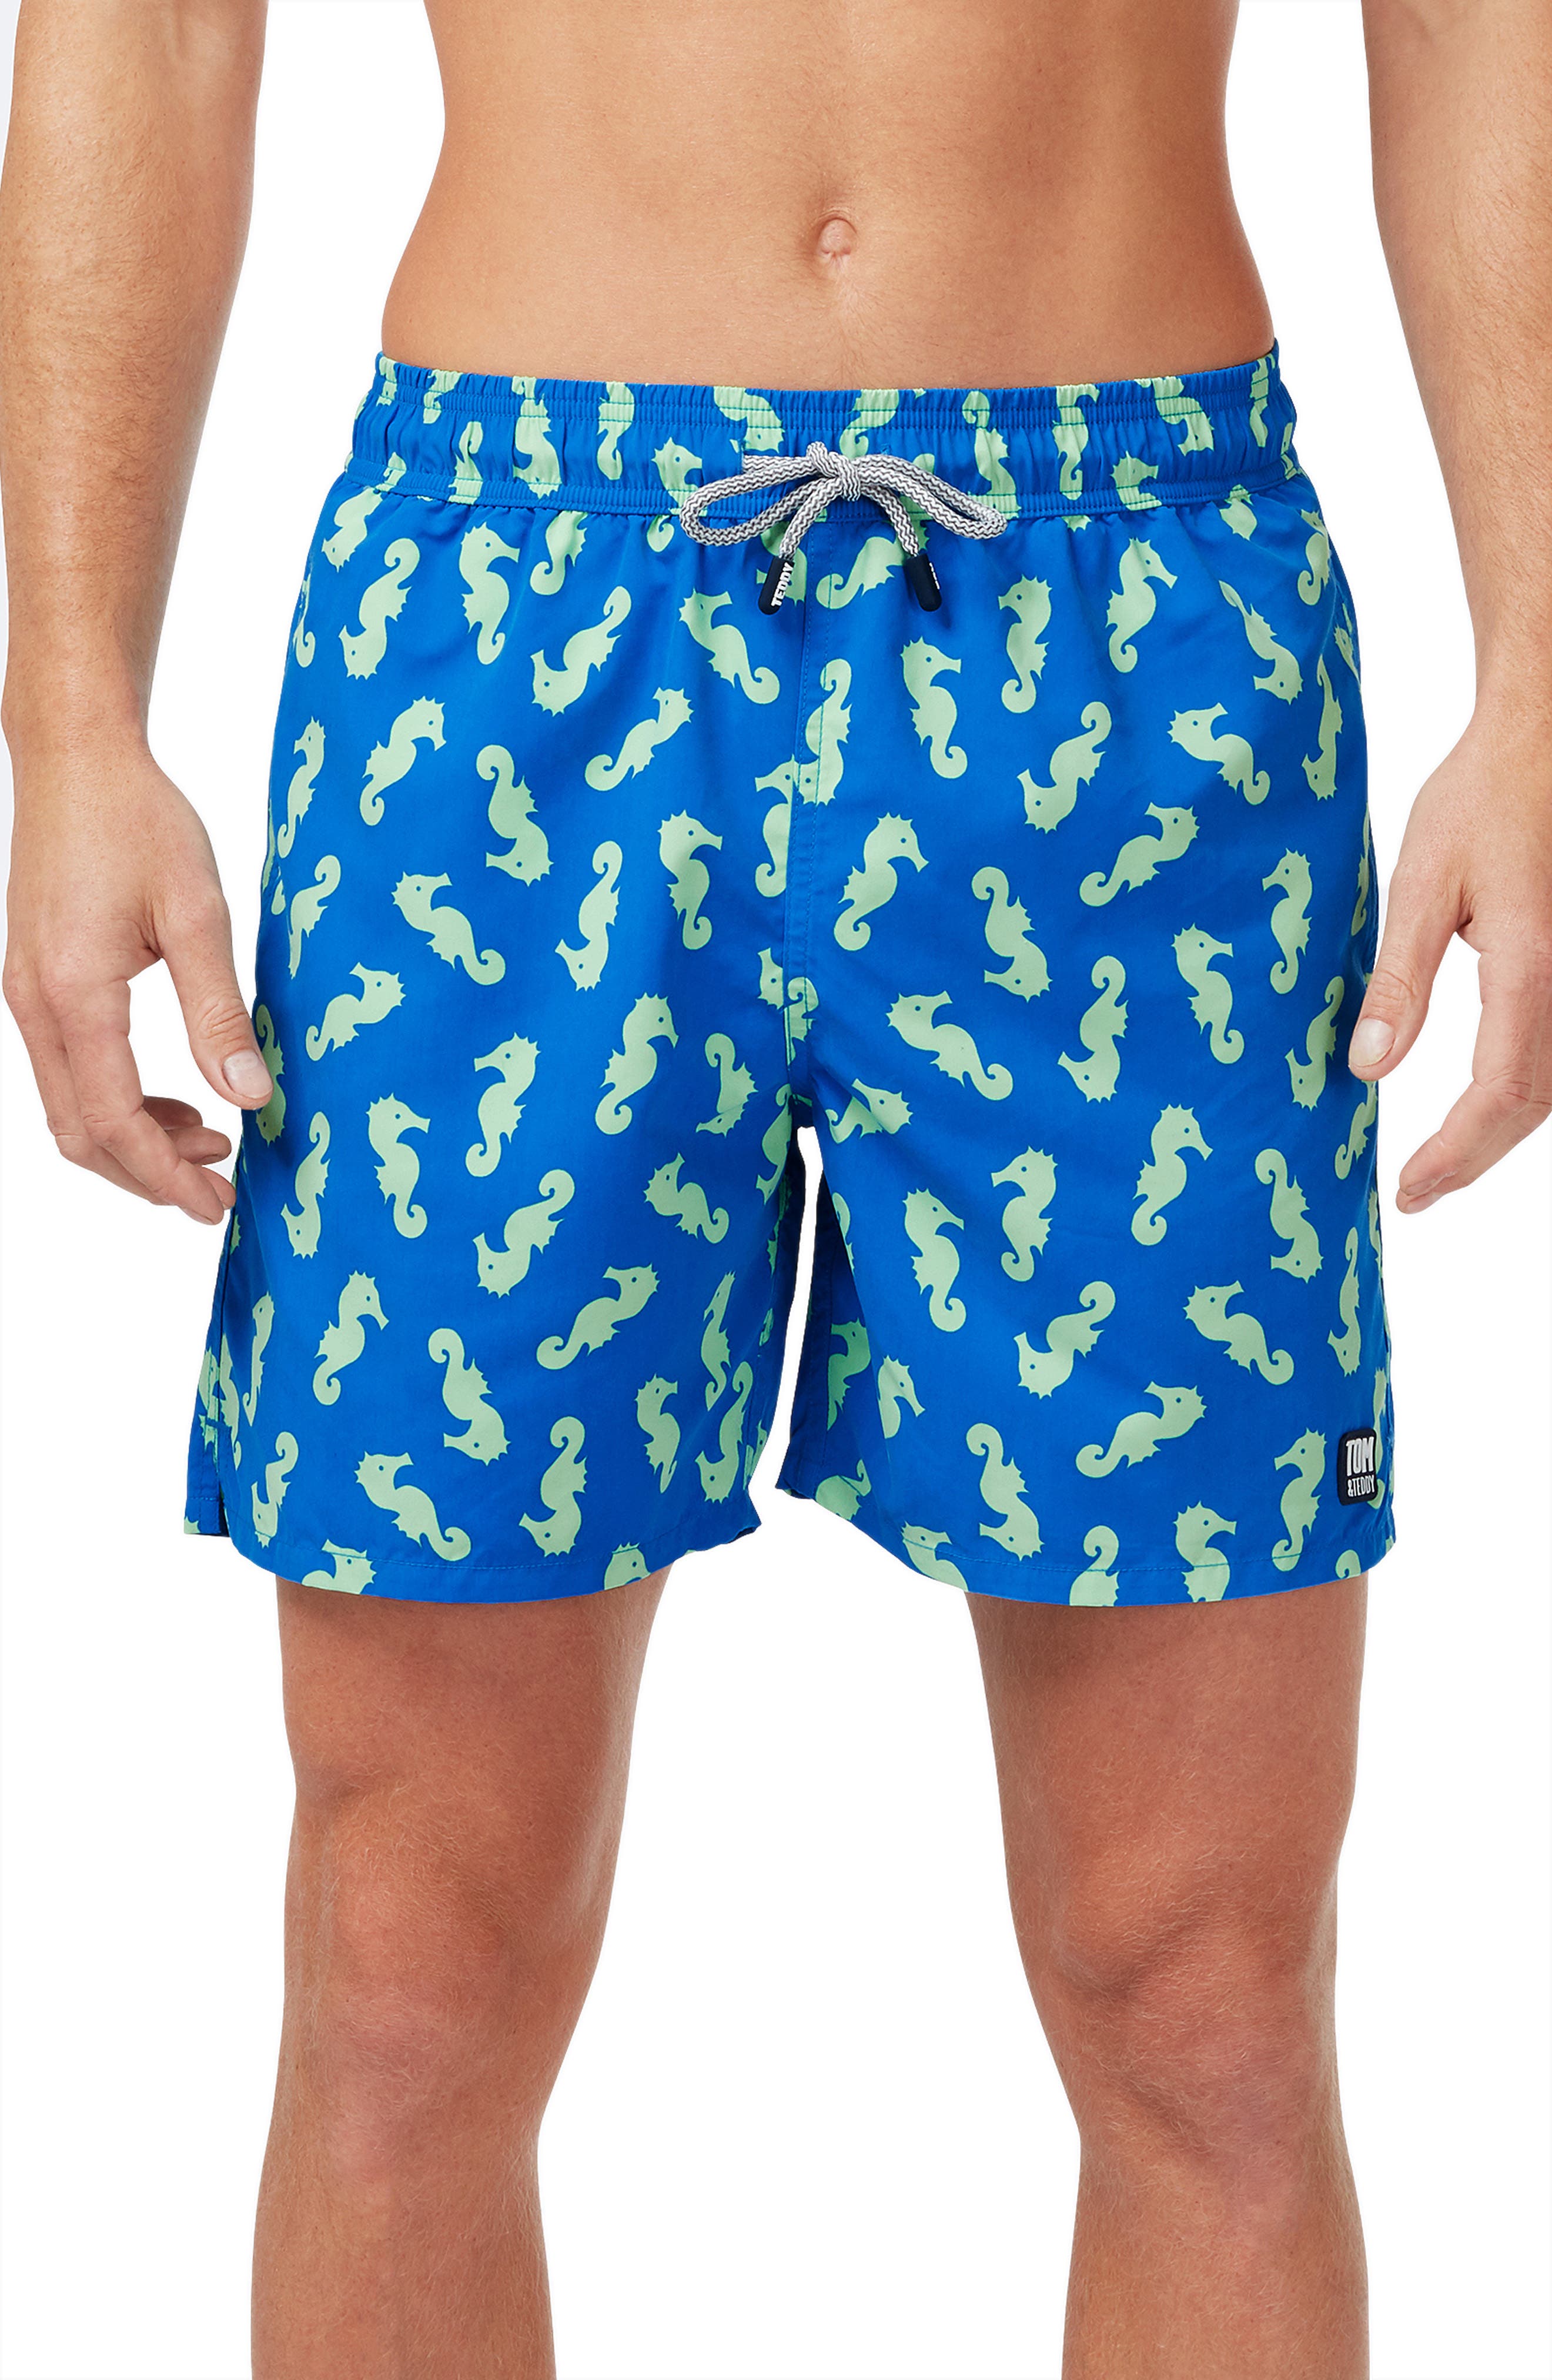 JERECY Mens Swim Trunks Sun Smiley Face Quick Dry Board Shorts with Drawstring and Pockets 